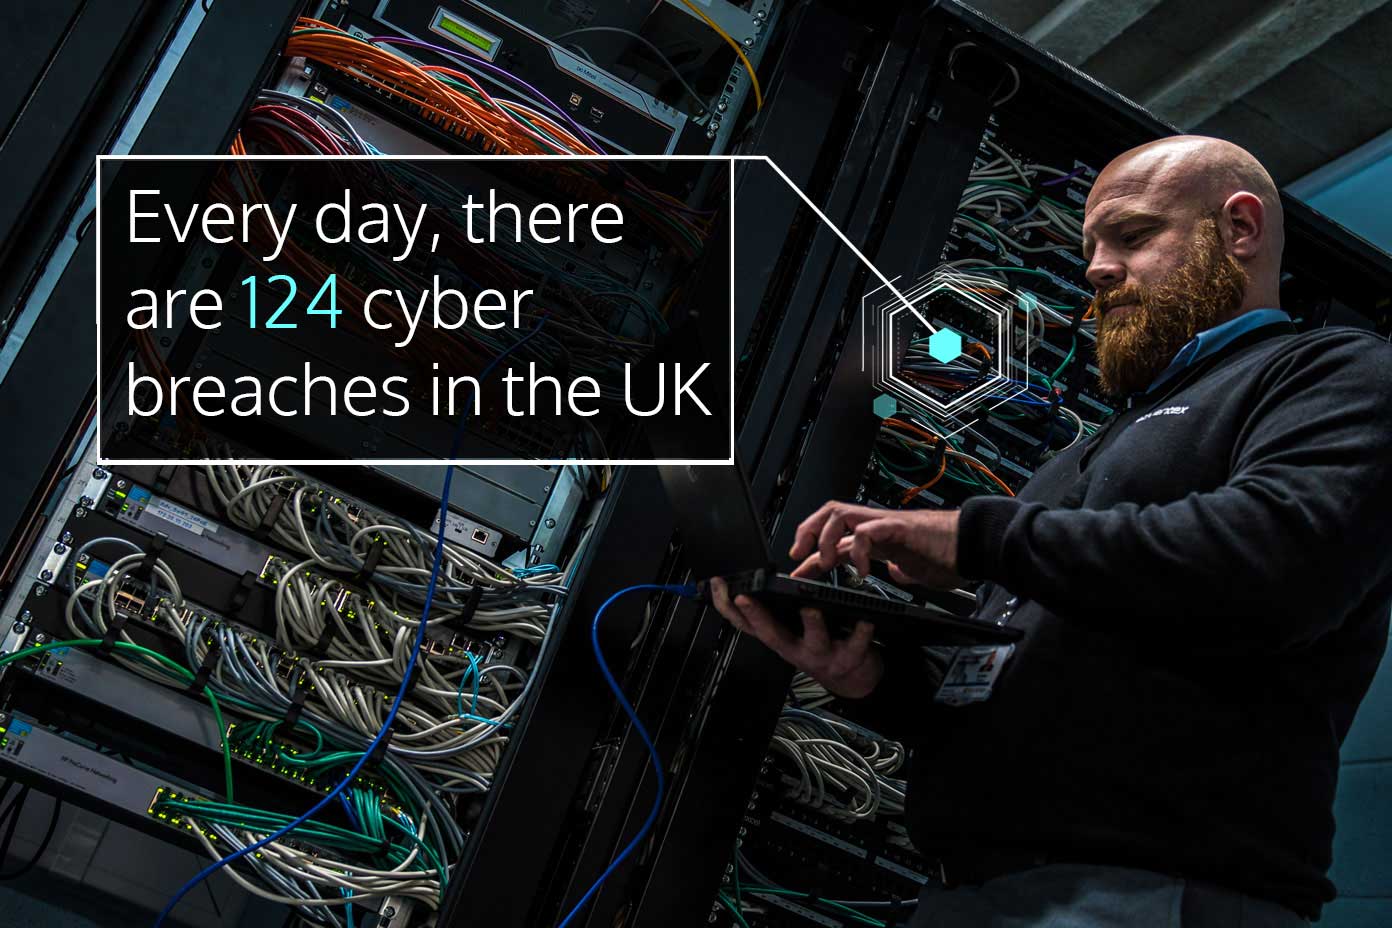 Do you know how many times your network was attacked this month?